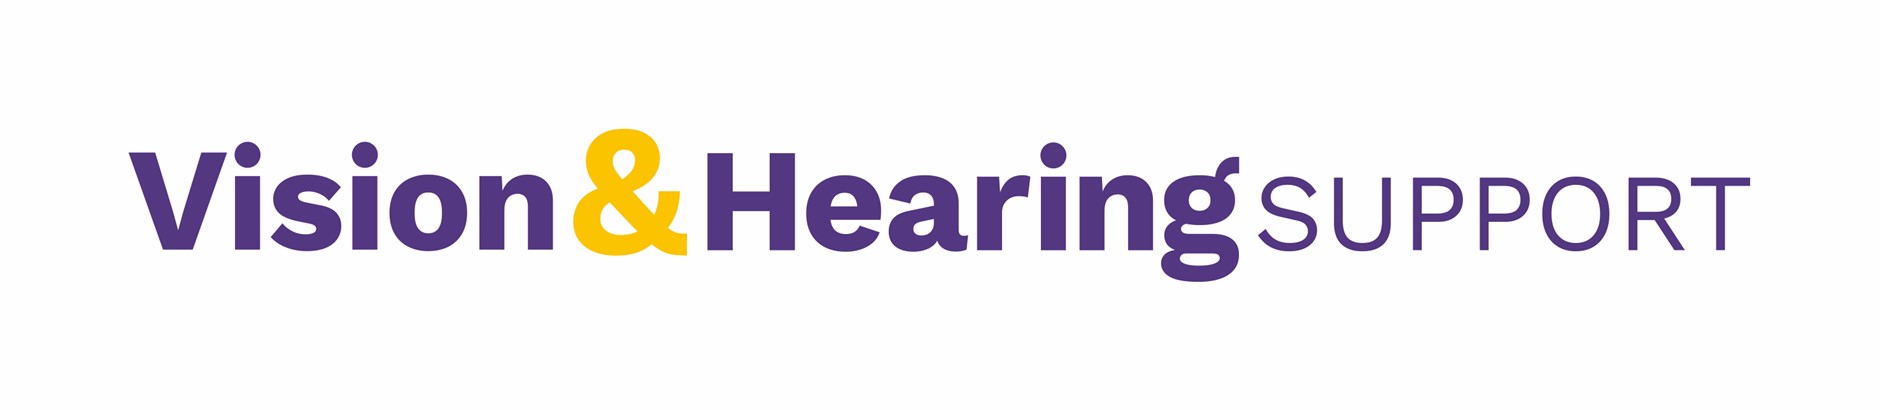 Vision & Hearing Support logo